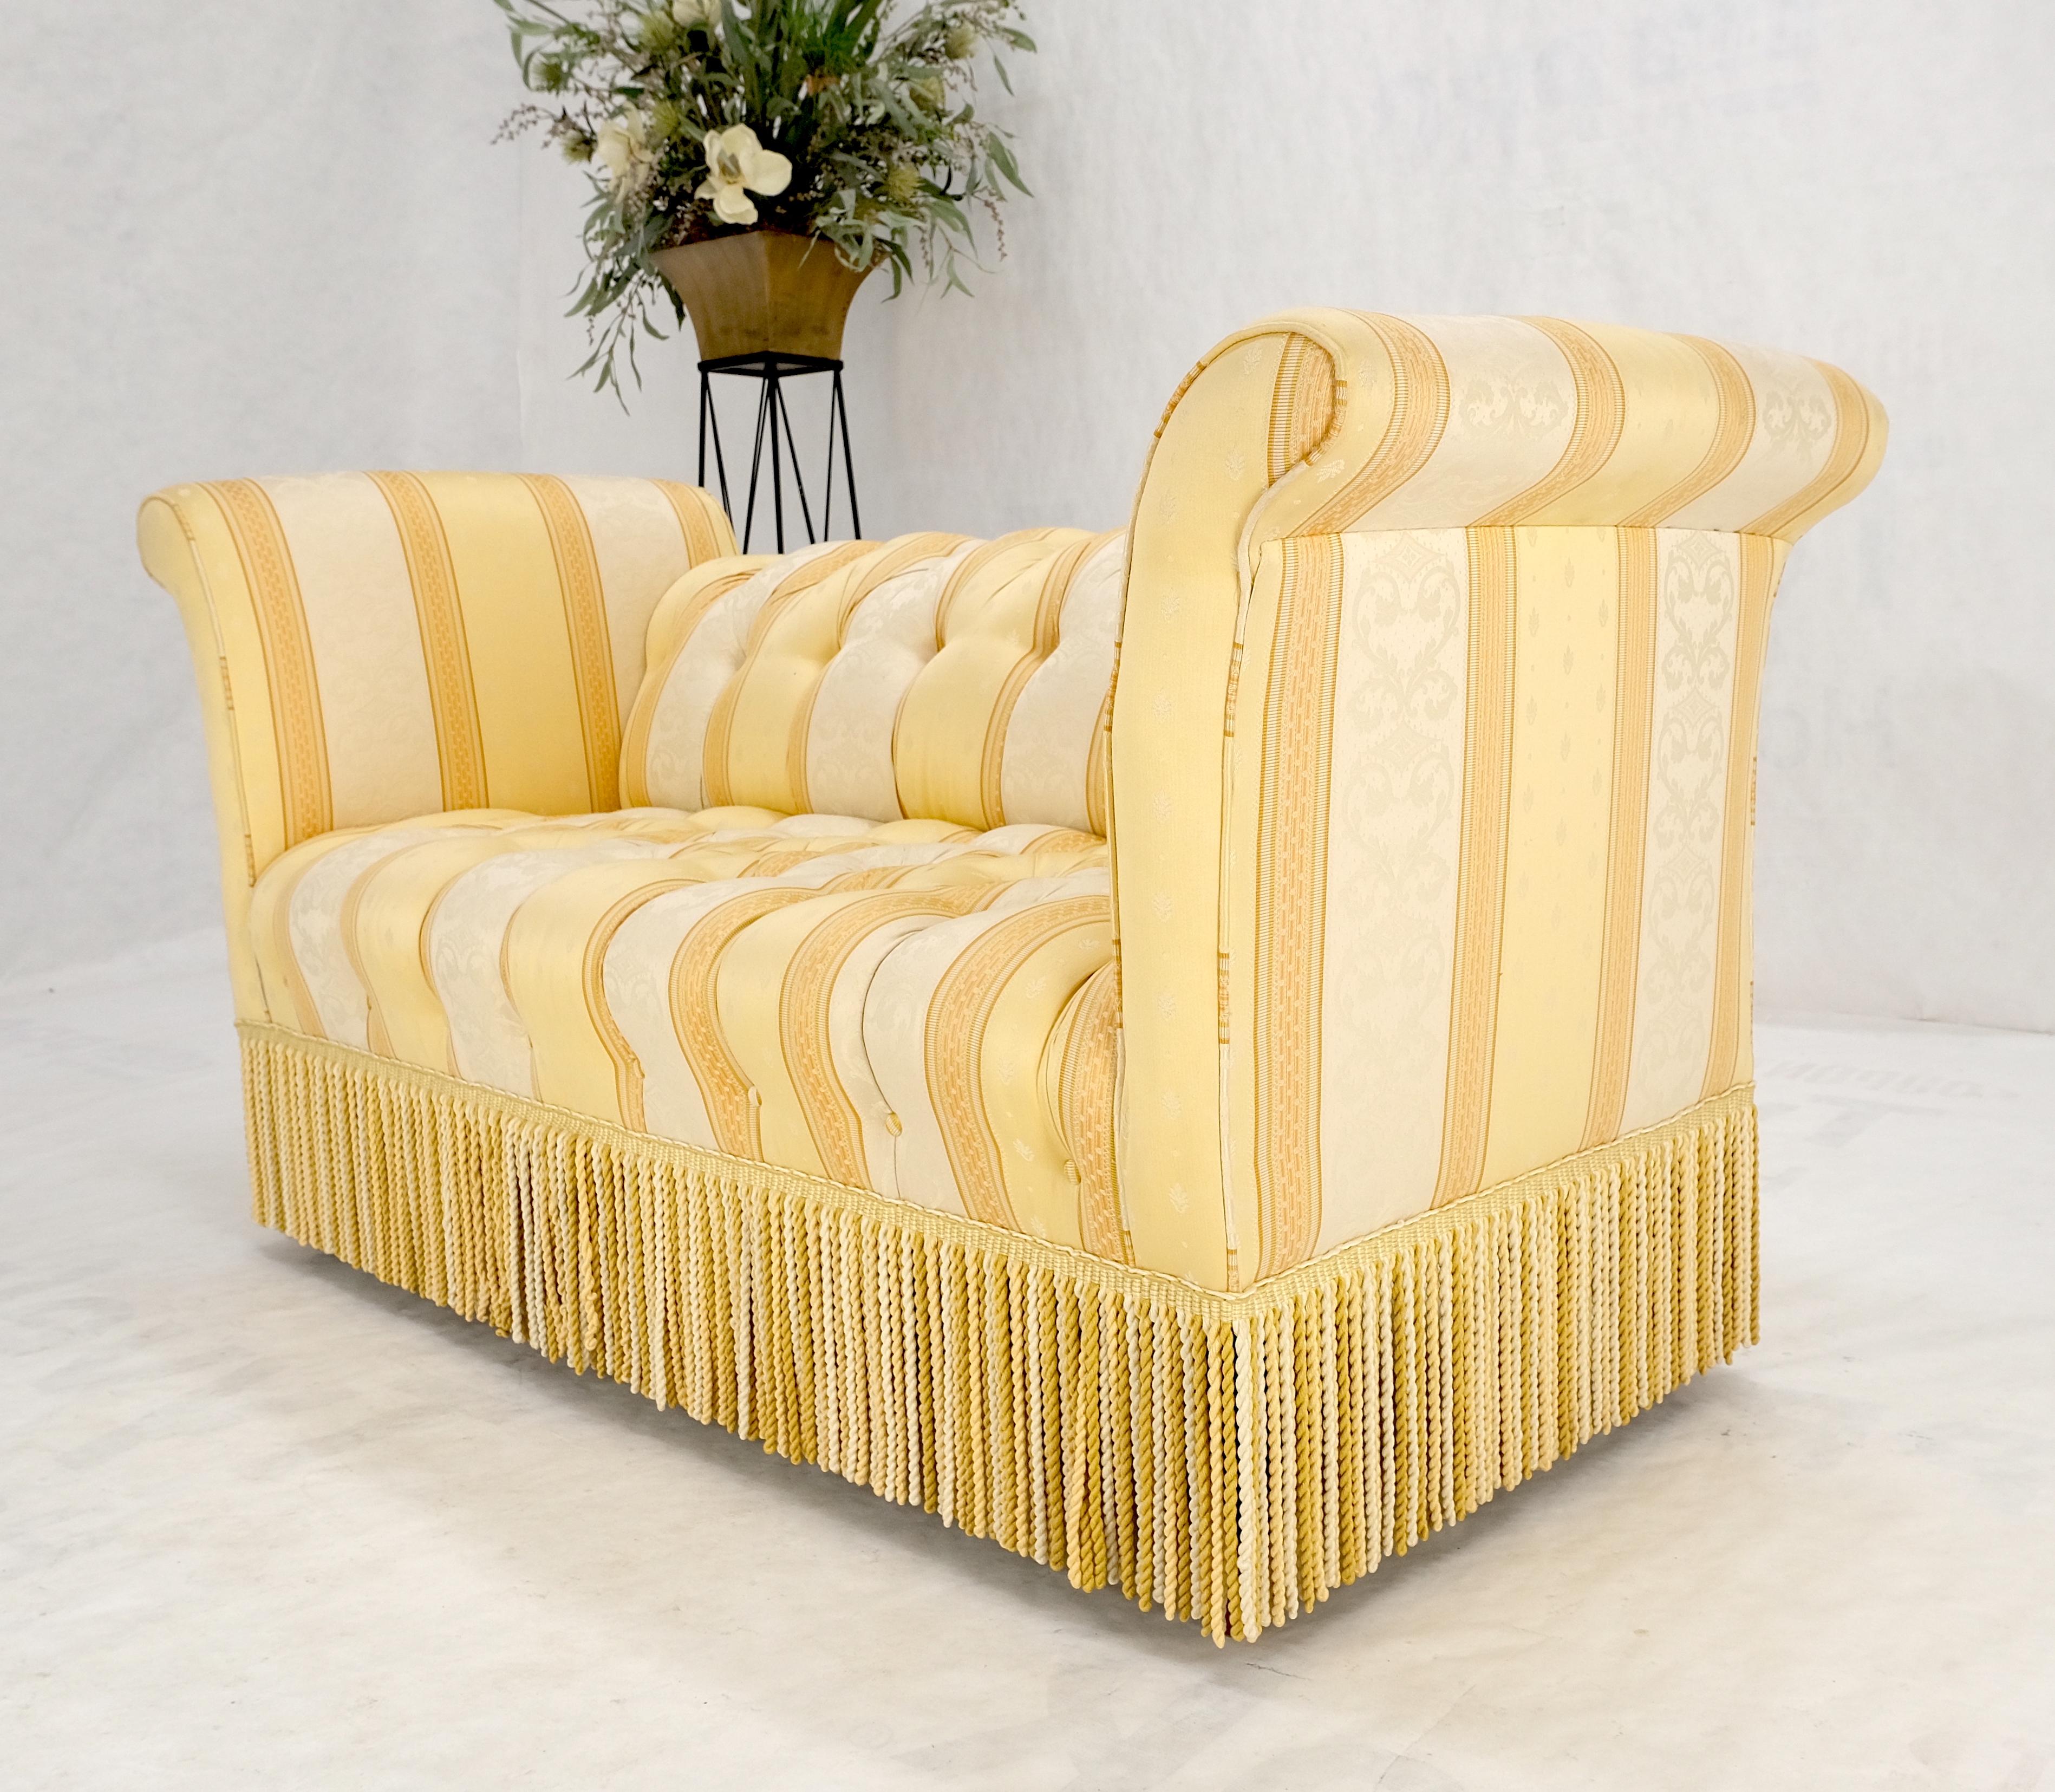 Chesterfield Gold & White Stripe Silk Upholstery Tufted Sofa Loveseat Tassels Decorated MINT! For Sale